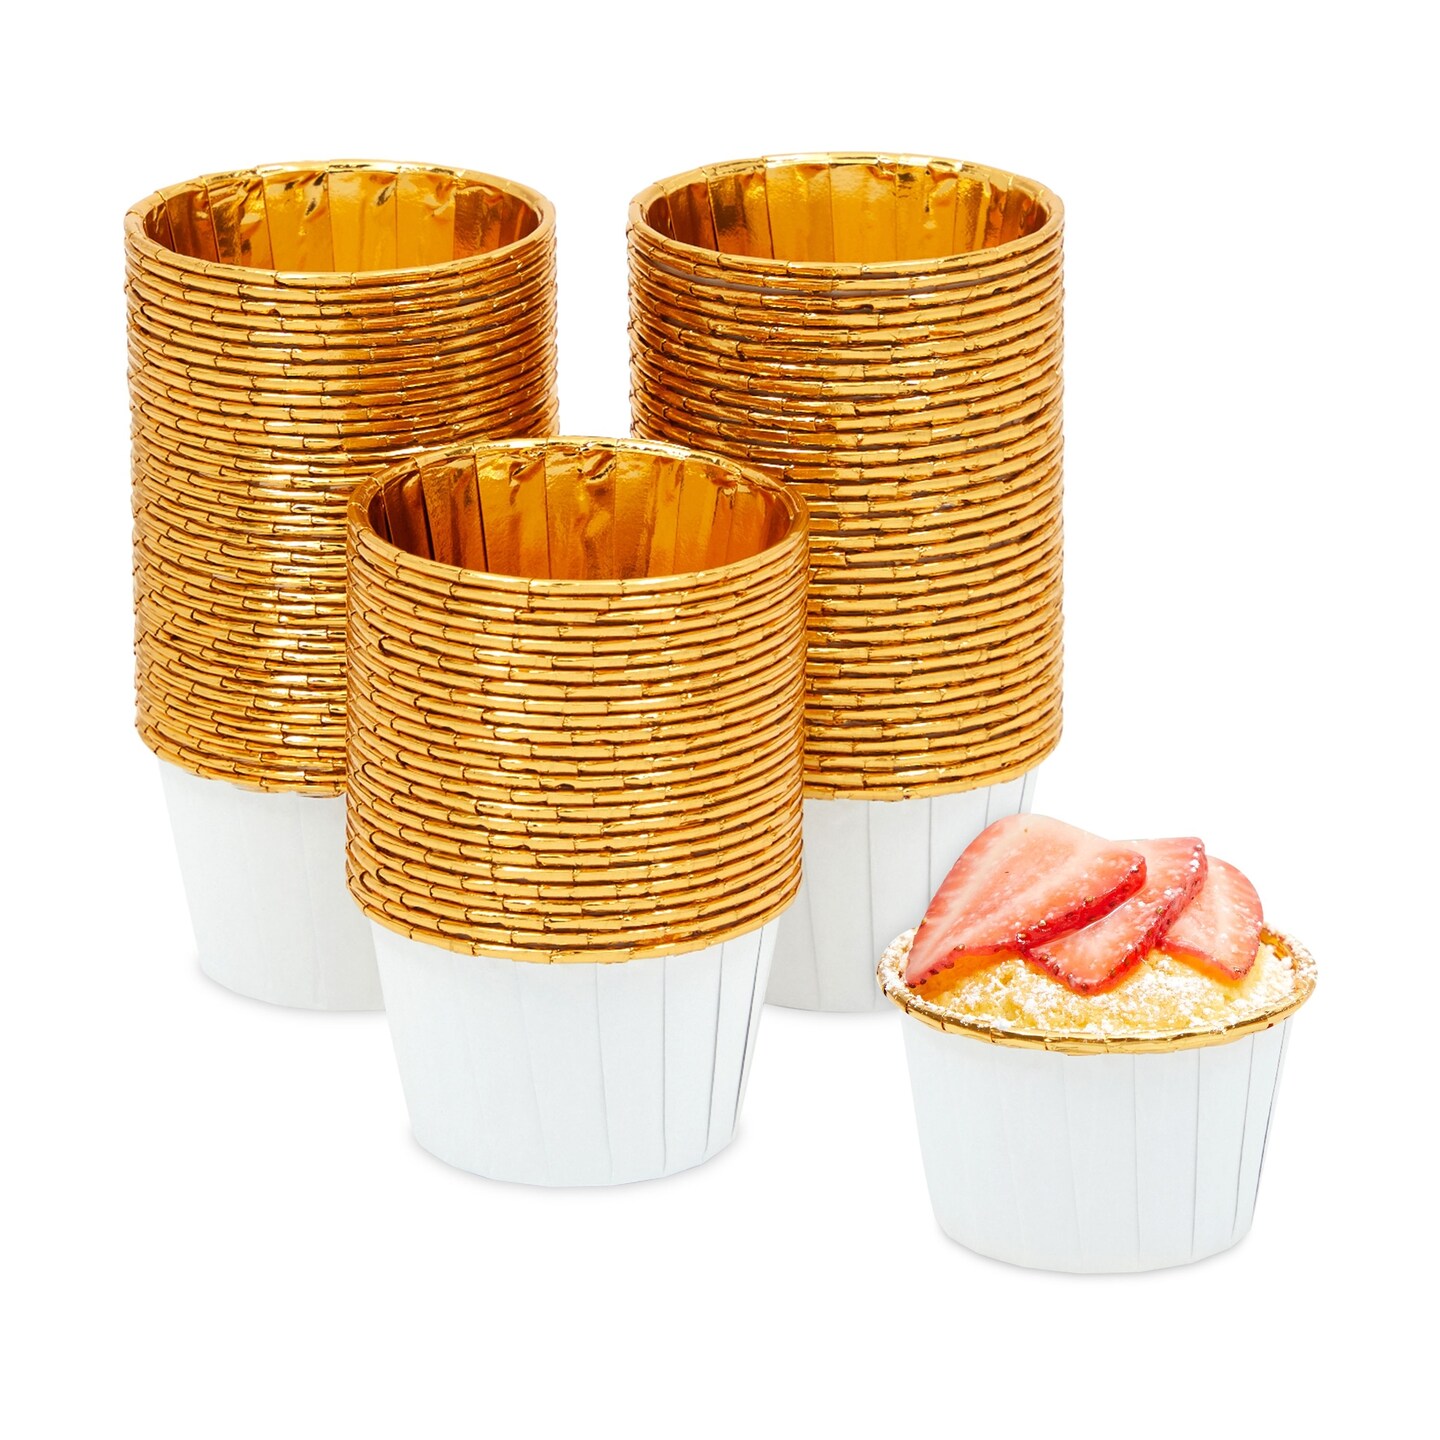 Buy Wilton Standard Baking Cups, Soccer Color Online at Low Prices in India  